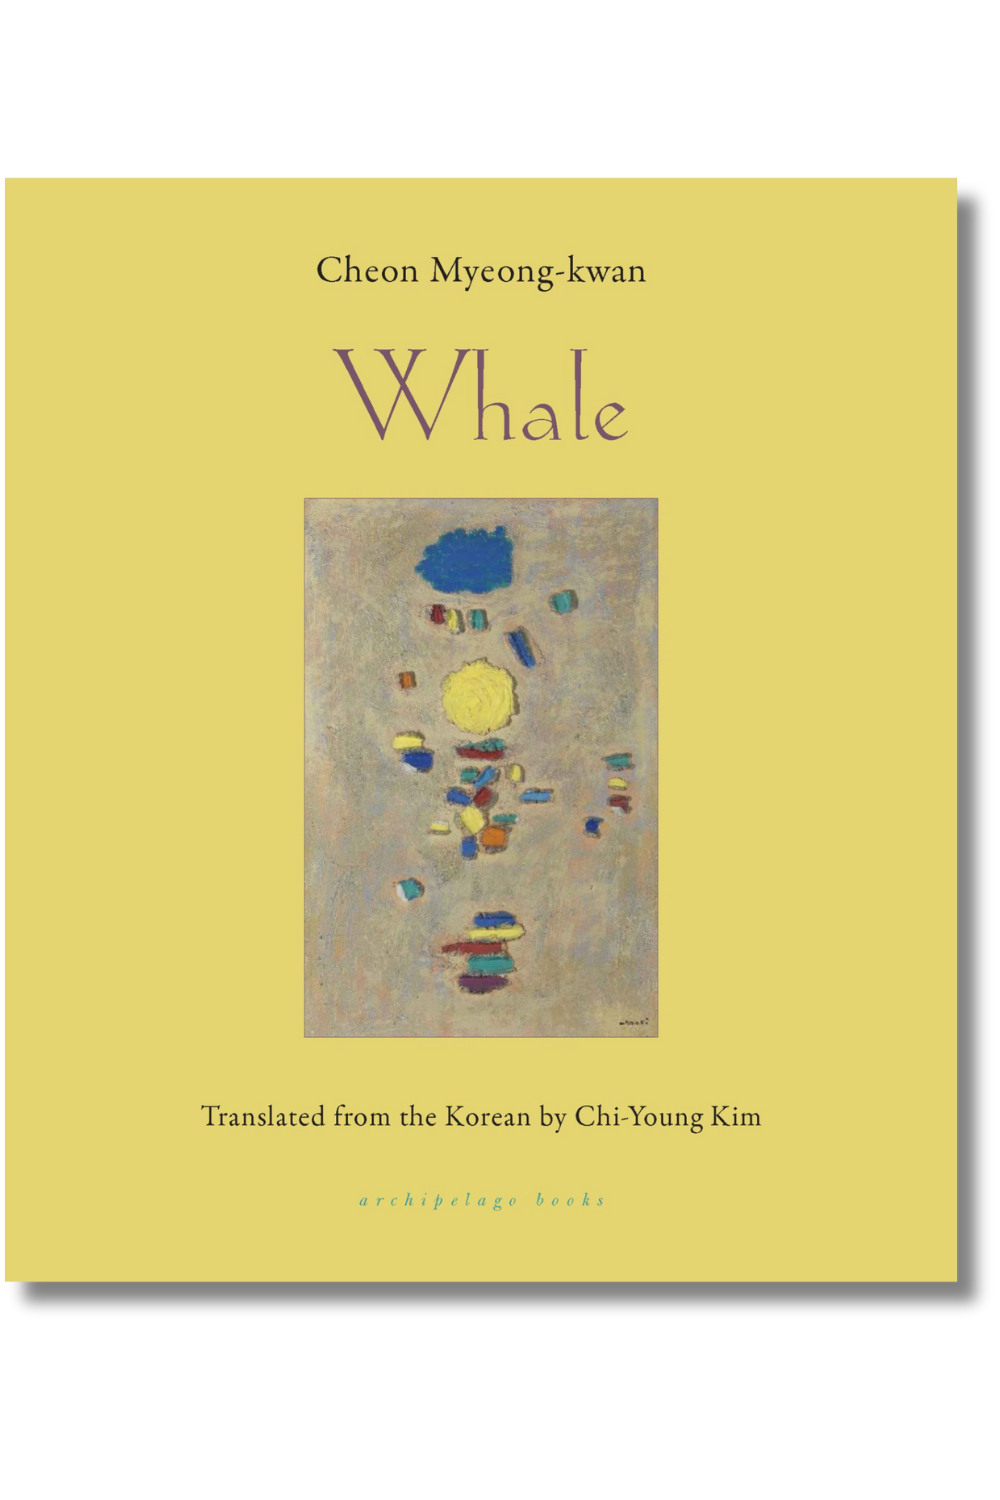 The cover of "Whale" by Cheon Myeong-Kwan, translated by Chi-Young Kim